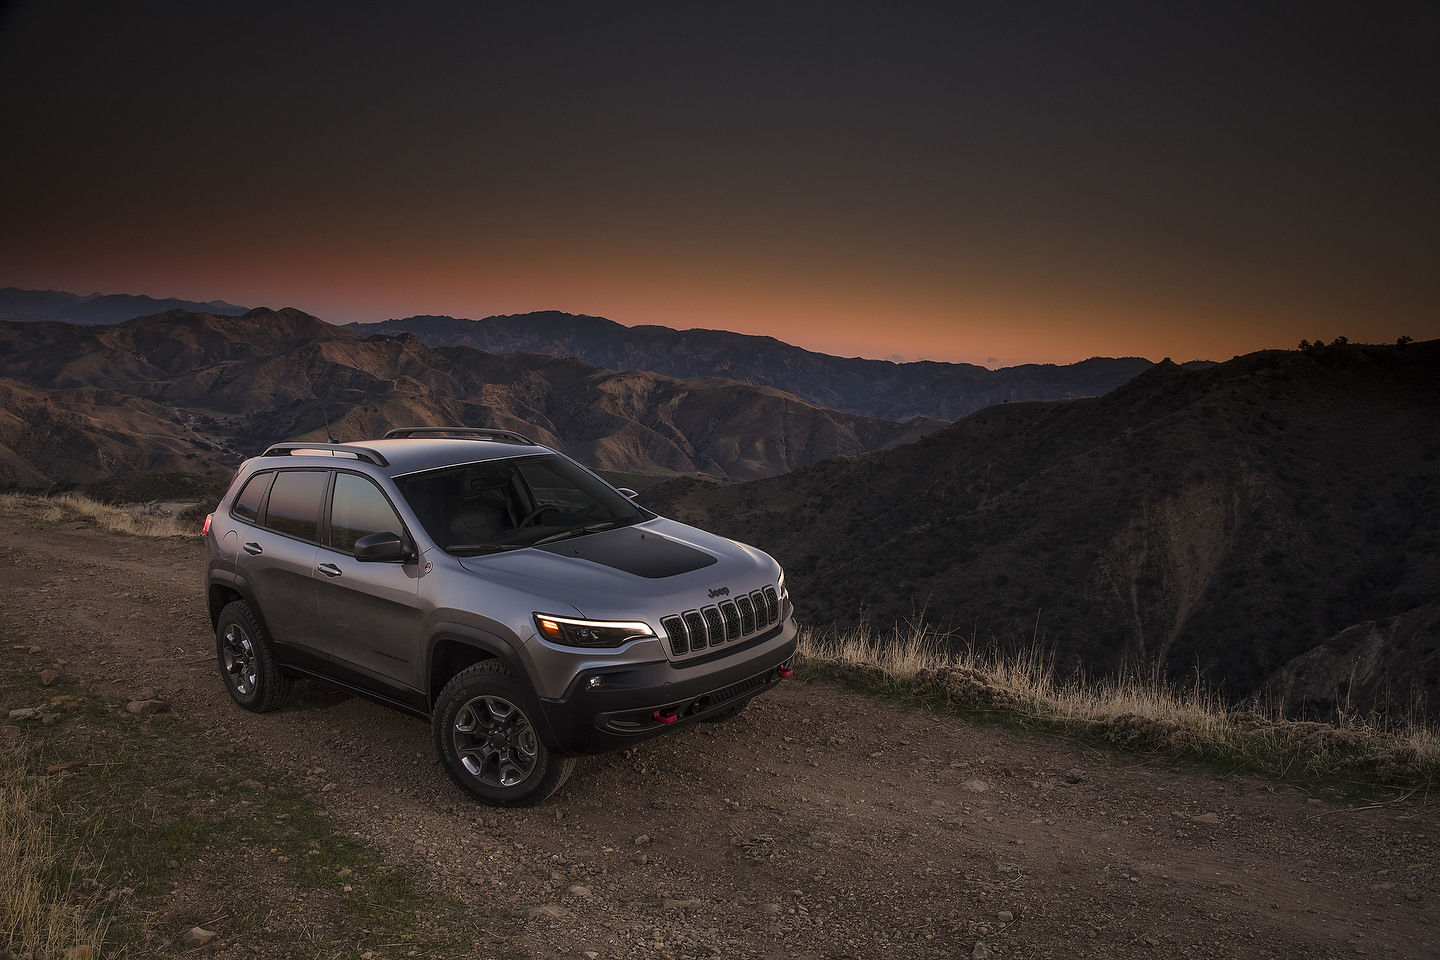 2021 Jeep Cherokee vs 2021 Nissan Rogue: Go further in a Jeep